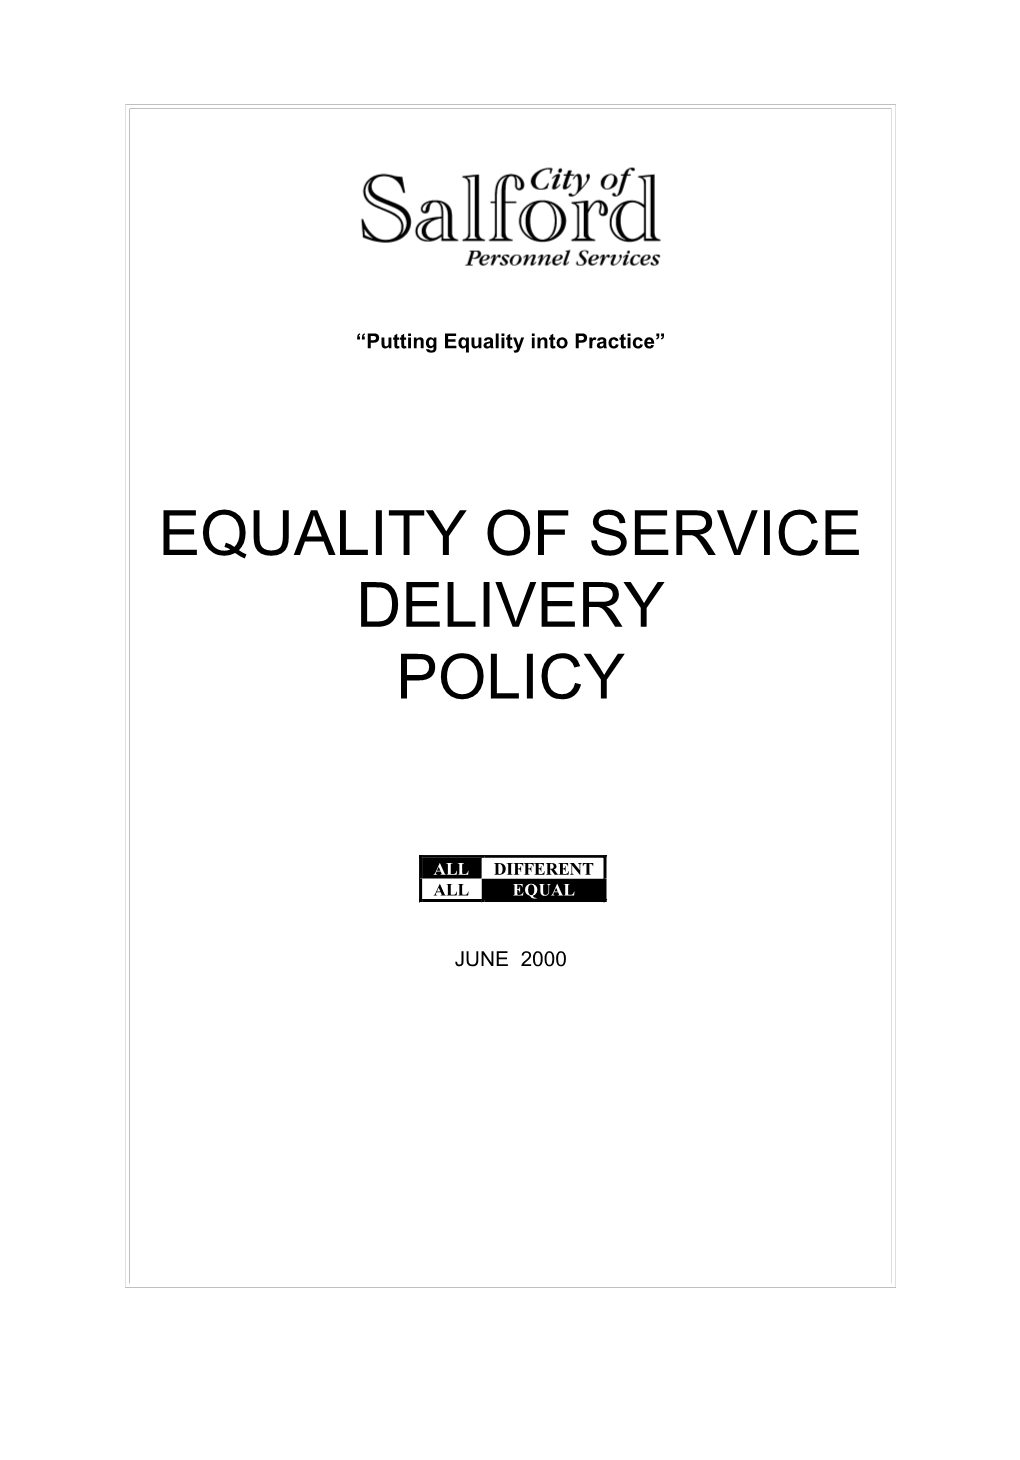 Equality of Service Delivery Policy